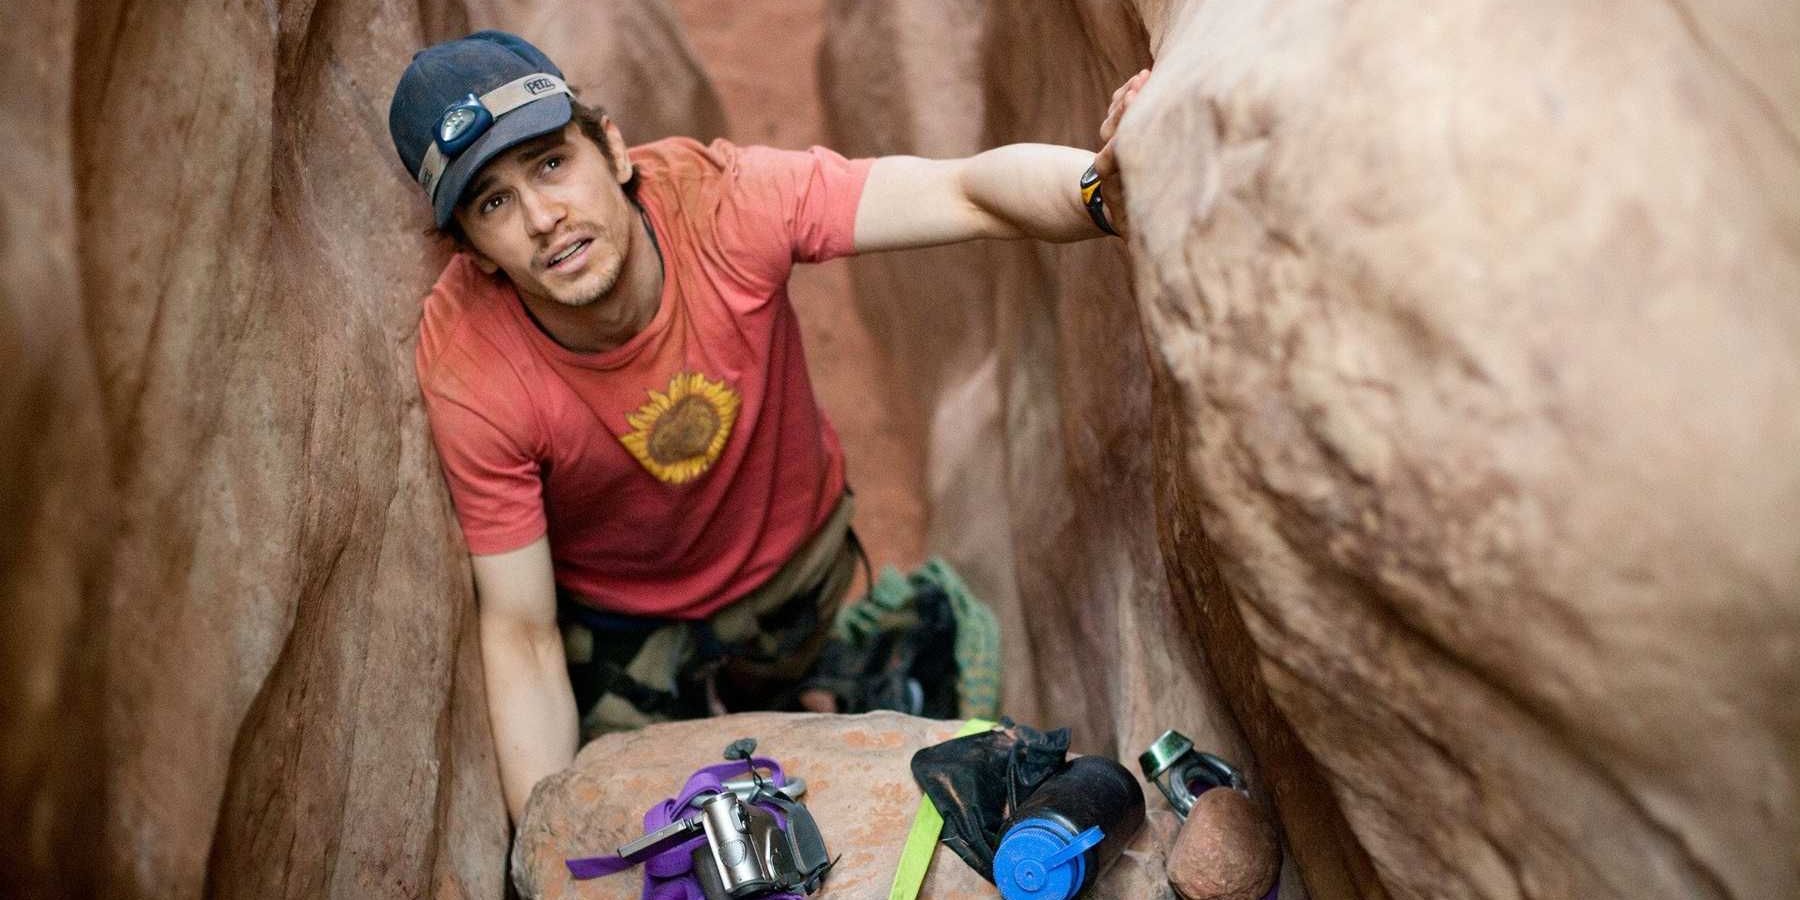 James Franco as Aaron Ralston trapped between boulders in 127 Hours